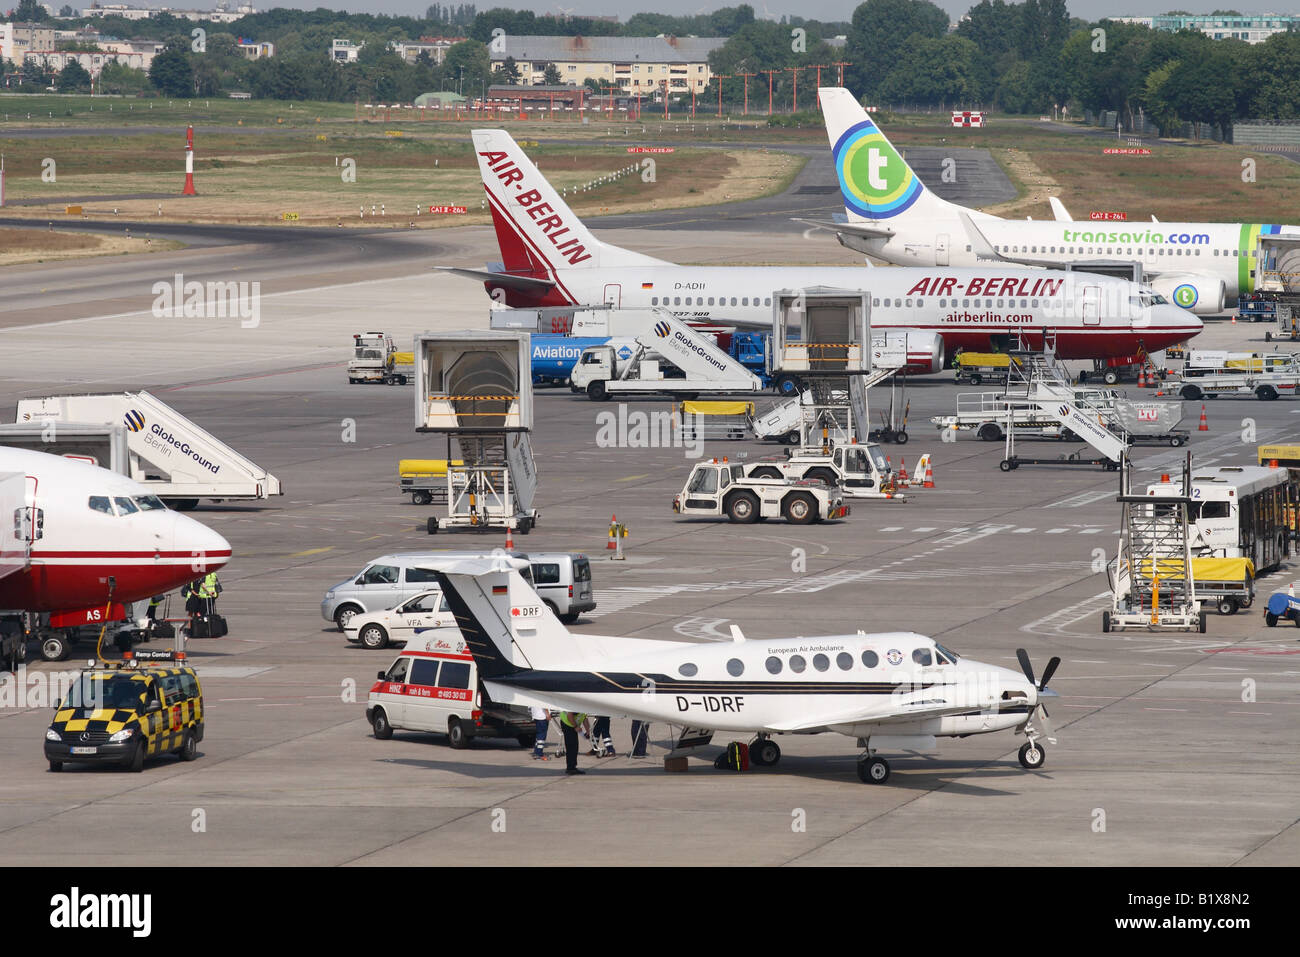 Berlin Tegel airport Germany busy ramp scene with Air Berlin Boeing 737 jet airliner aircraft and private Beech 200 aircraft Stock Photo